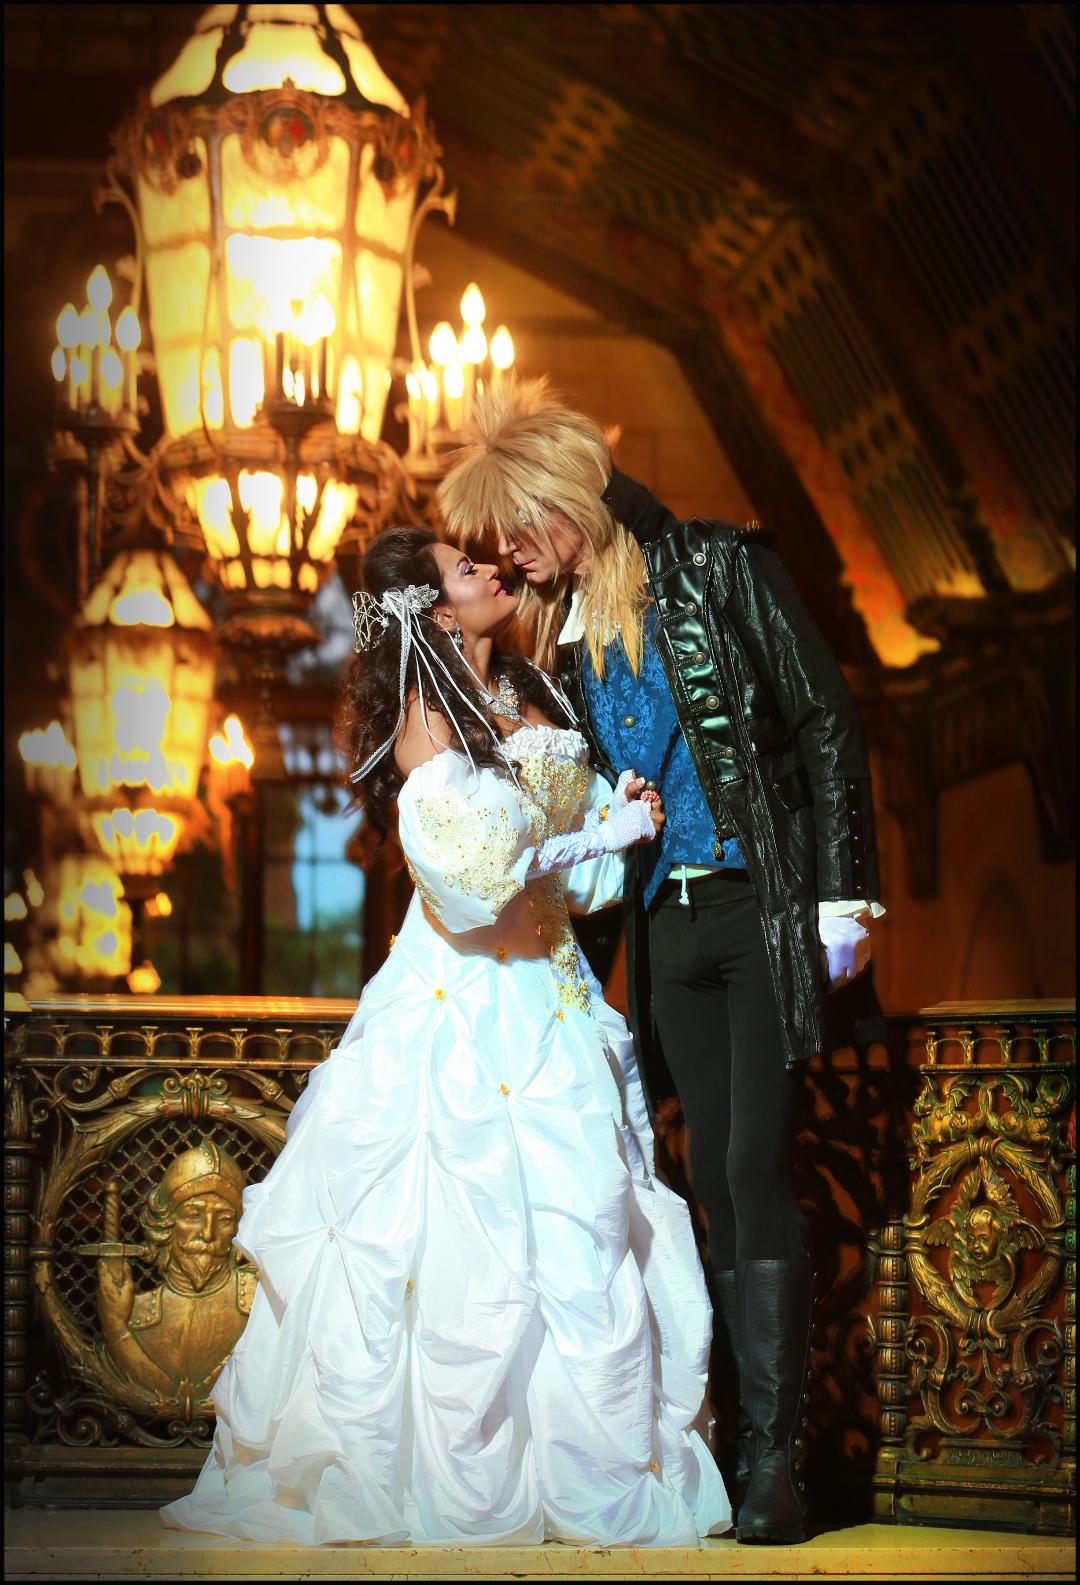 Labyrinth Masquerade Ball: A Fantasy Experience Blended with Music and